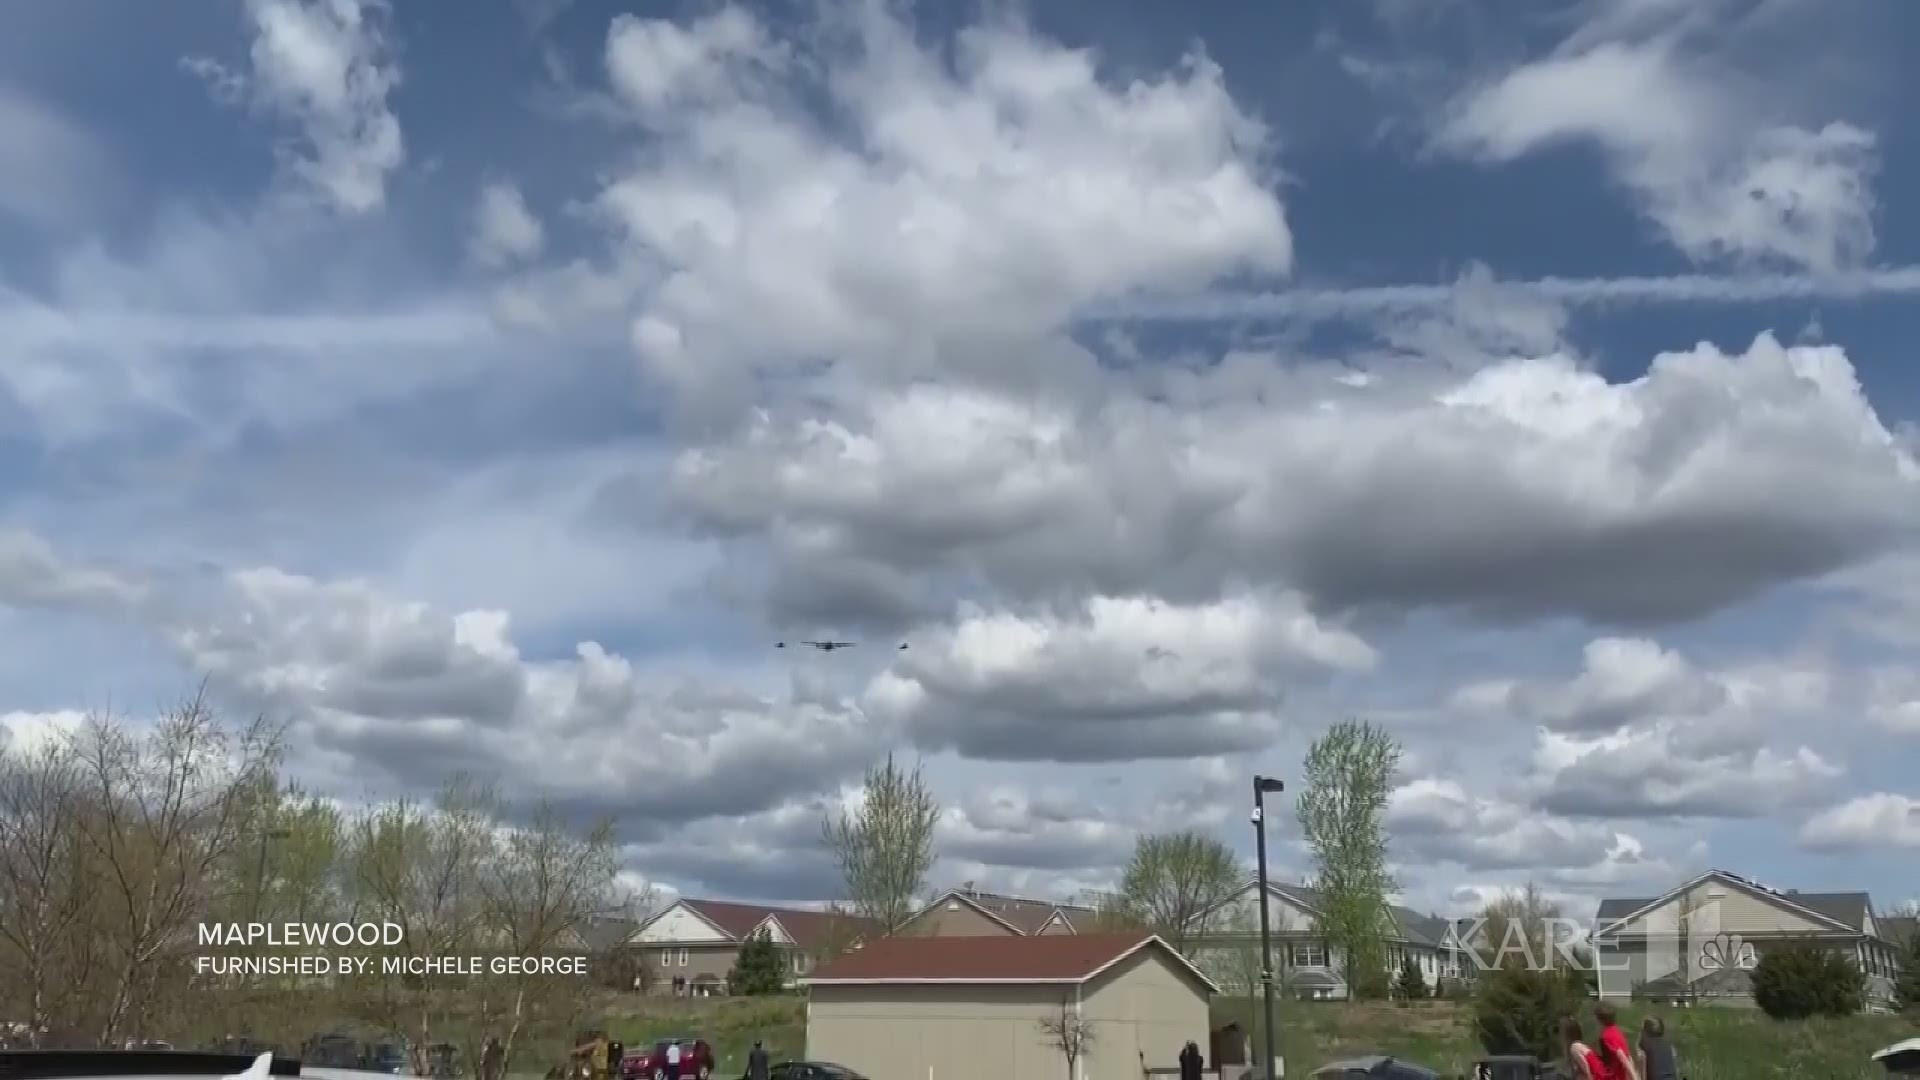 The Minnesota Air National Guard conducted flyovers at health care facilities across the state on Wednesday to pay tribute to the frontline workers in the COVID-19 c